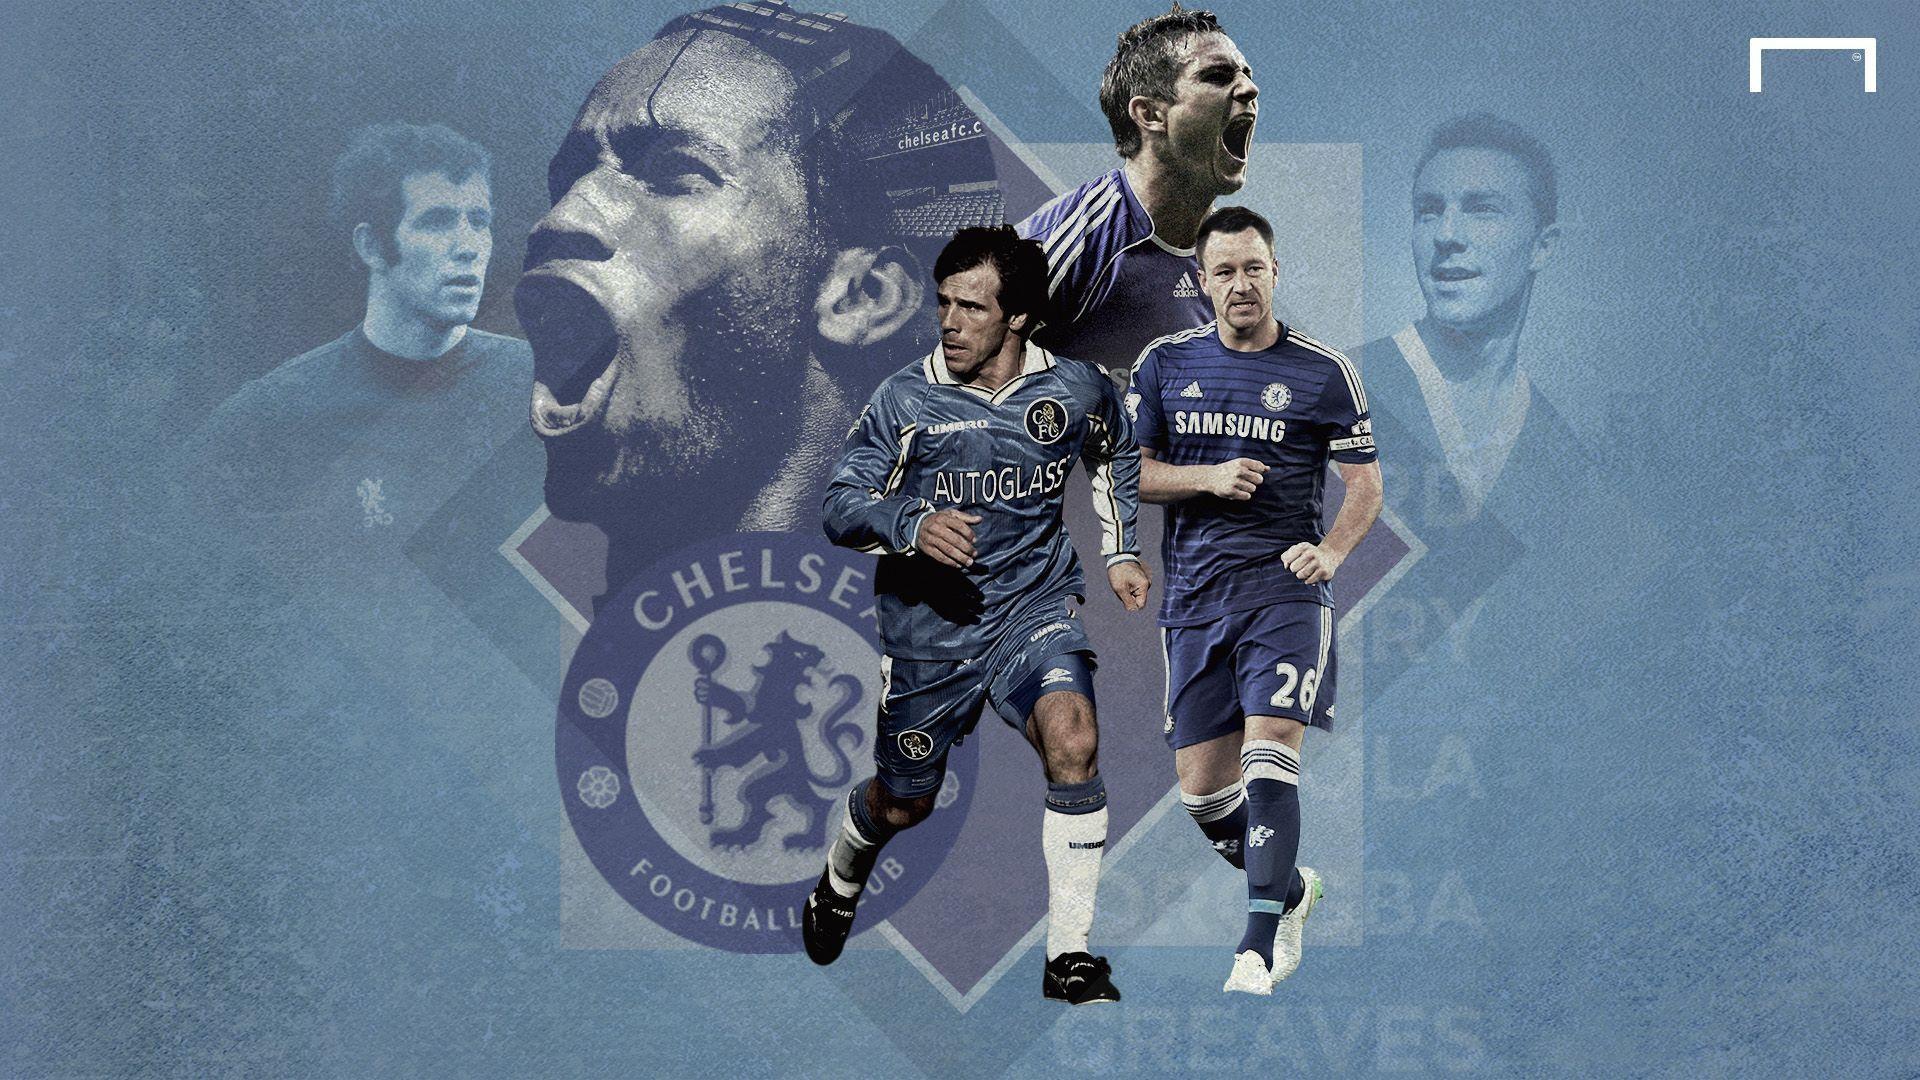 The 20 greatest Chelsea players of all time